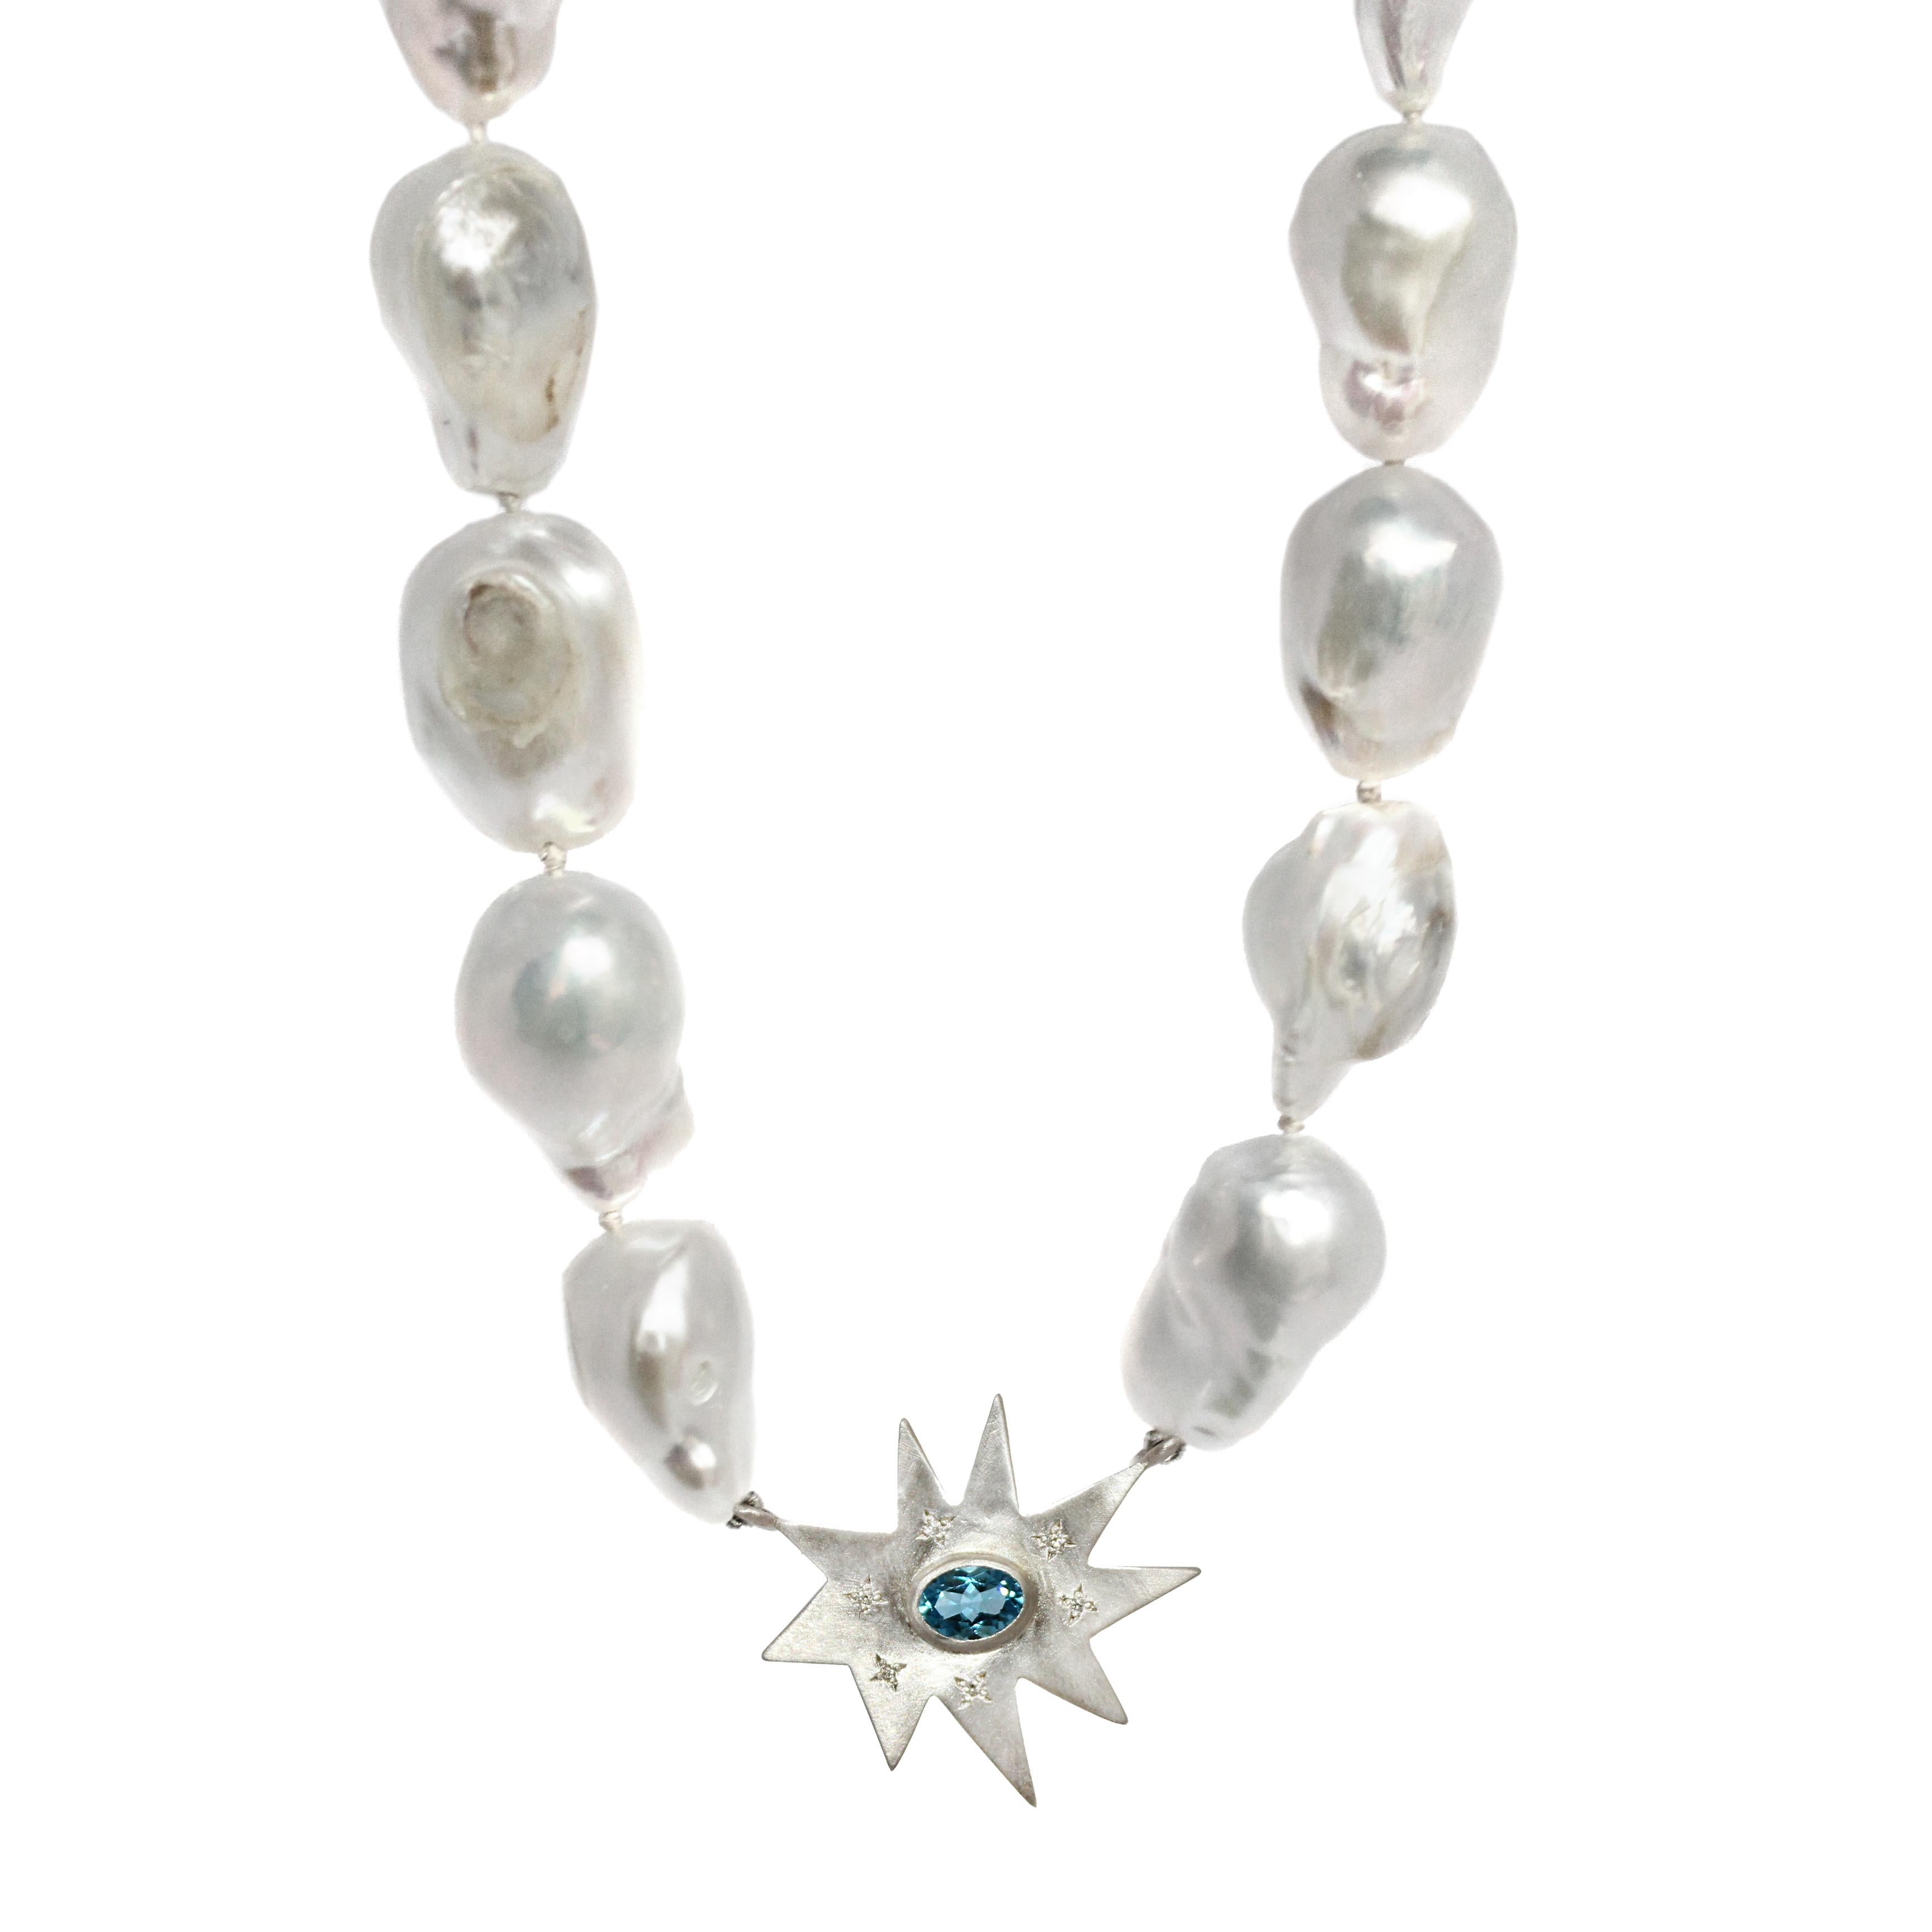 Our classic Stella star topped with diamonds is the home to a vibrant blue topaz center and framed perfectly against a strand of white baroque pearls. This necklace is full of natural beauty. Also pictured in gray/peacock pearls with peridot center